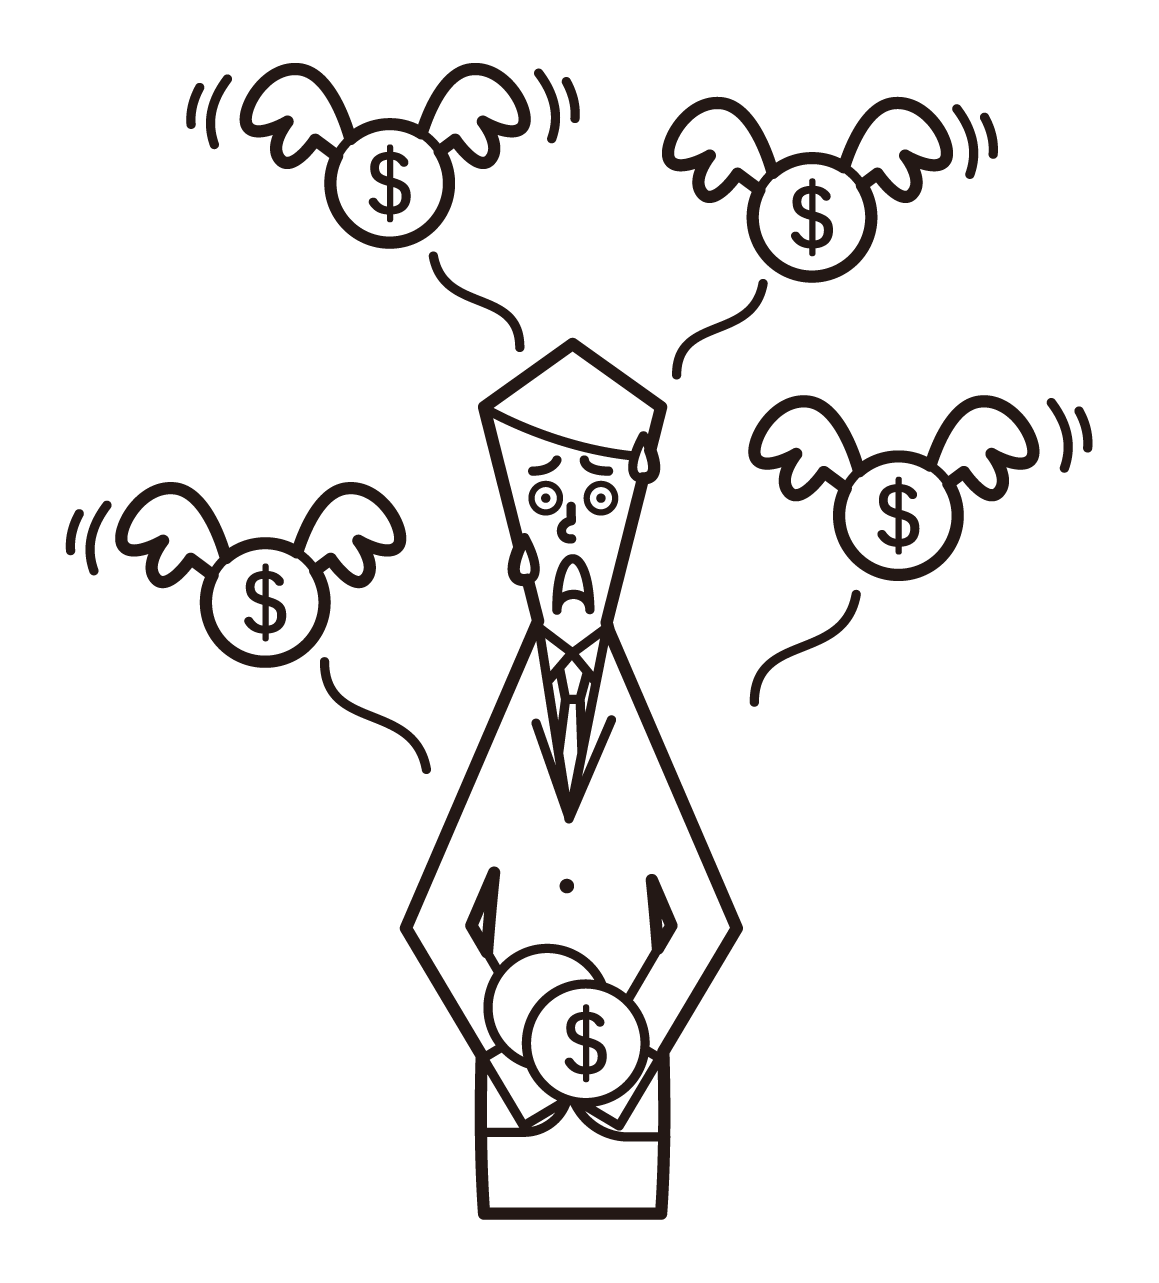 Illustration of a man paying taxes